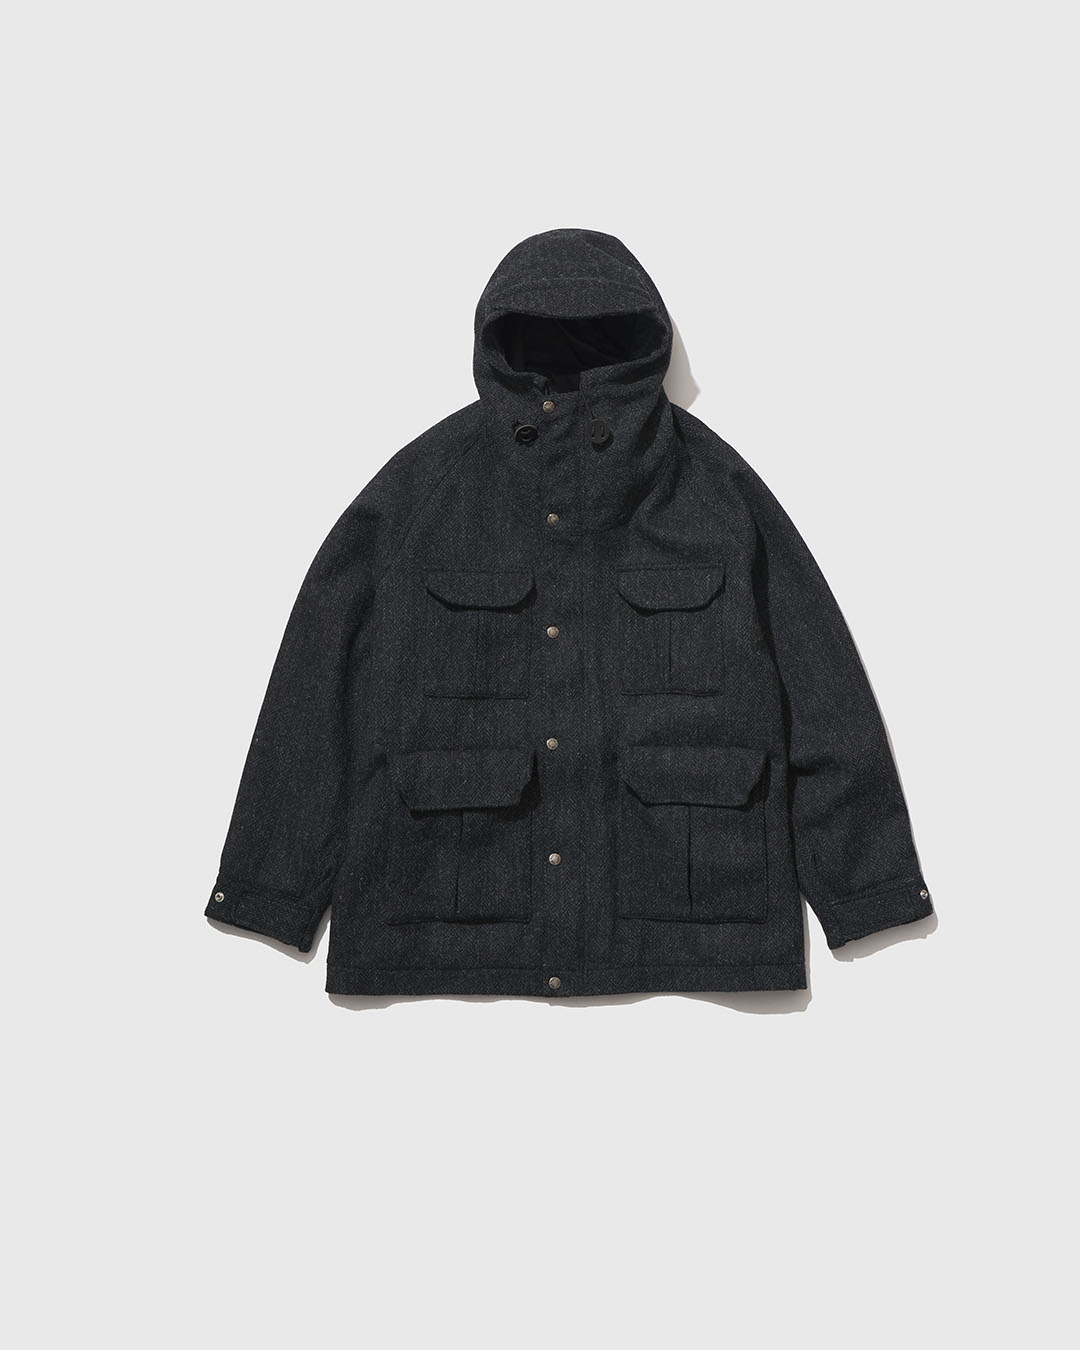 nanamica / THE NORTH FACE PURPLE LABEL / Featured Product vol.42